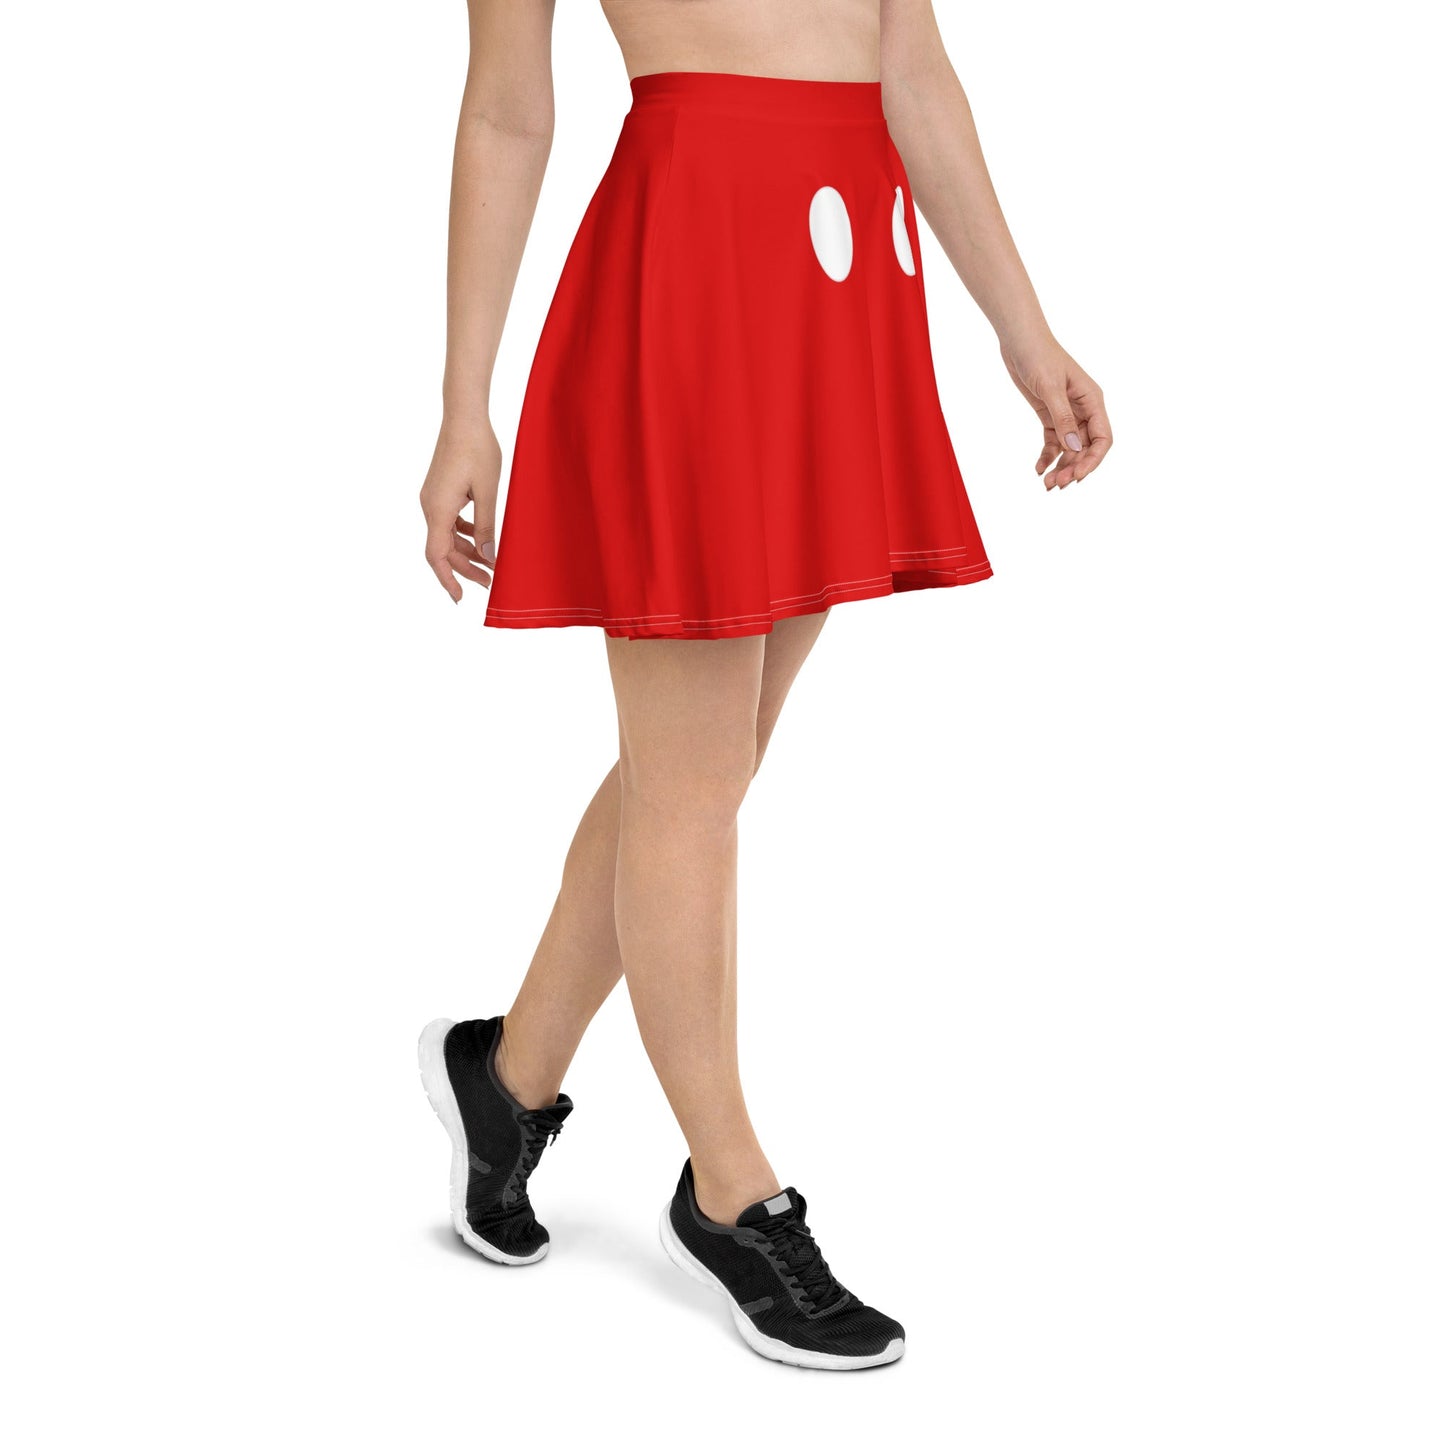 The Man Skater Skirt active wearboo to youdisney bounding#tag4##tag5##tag6#